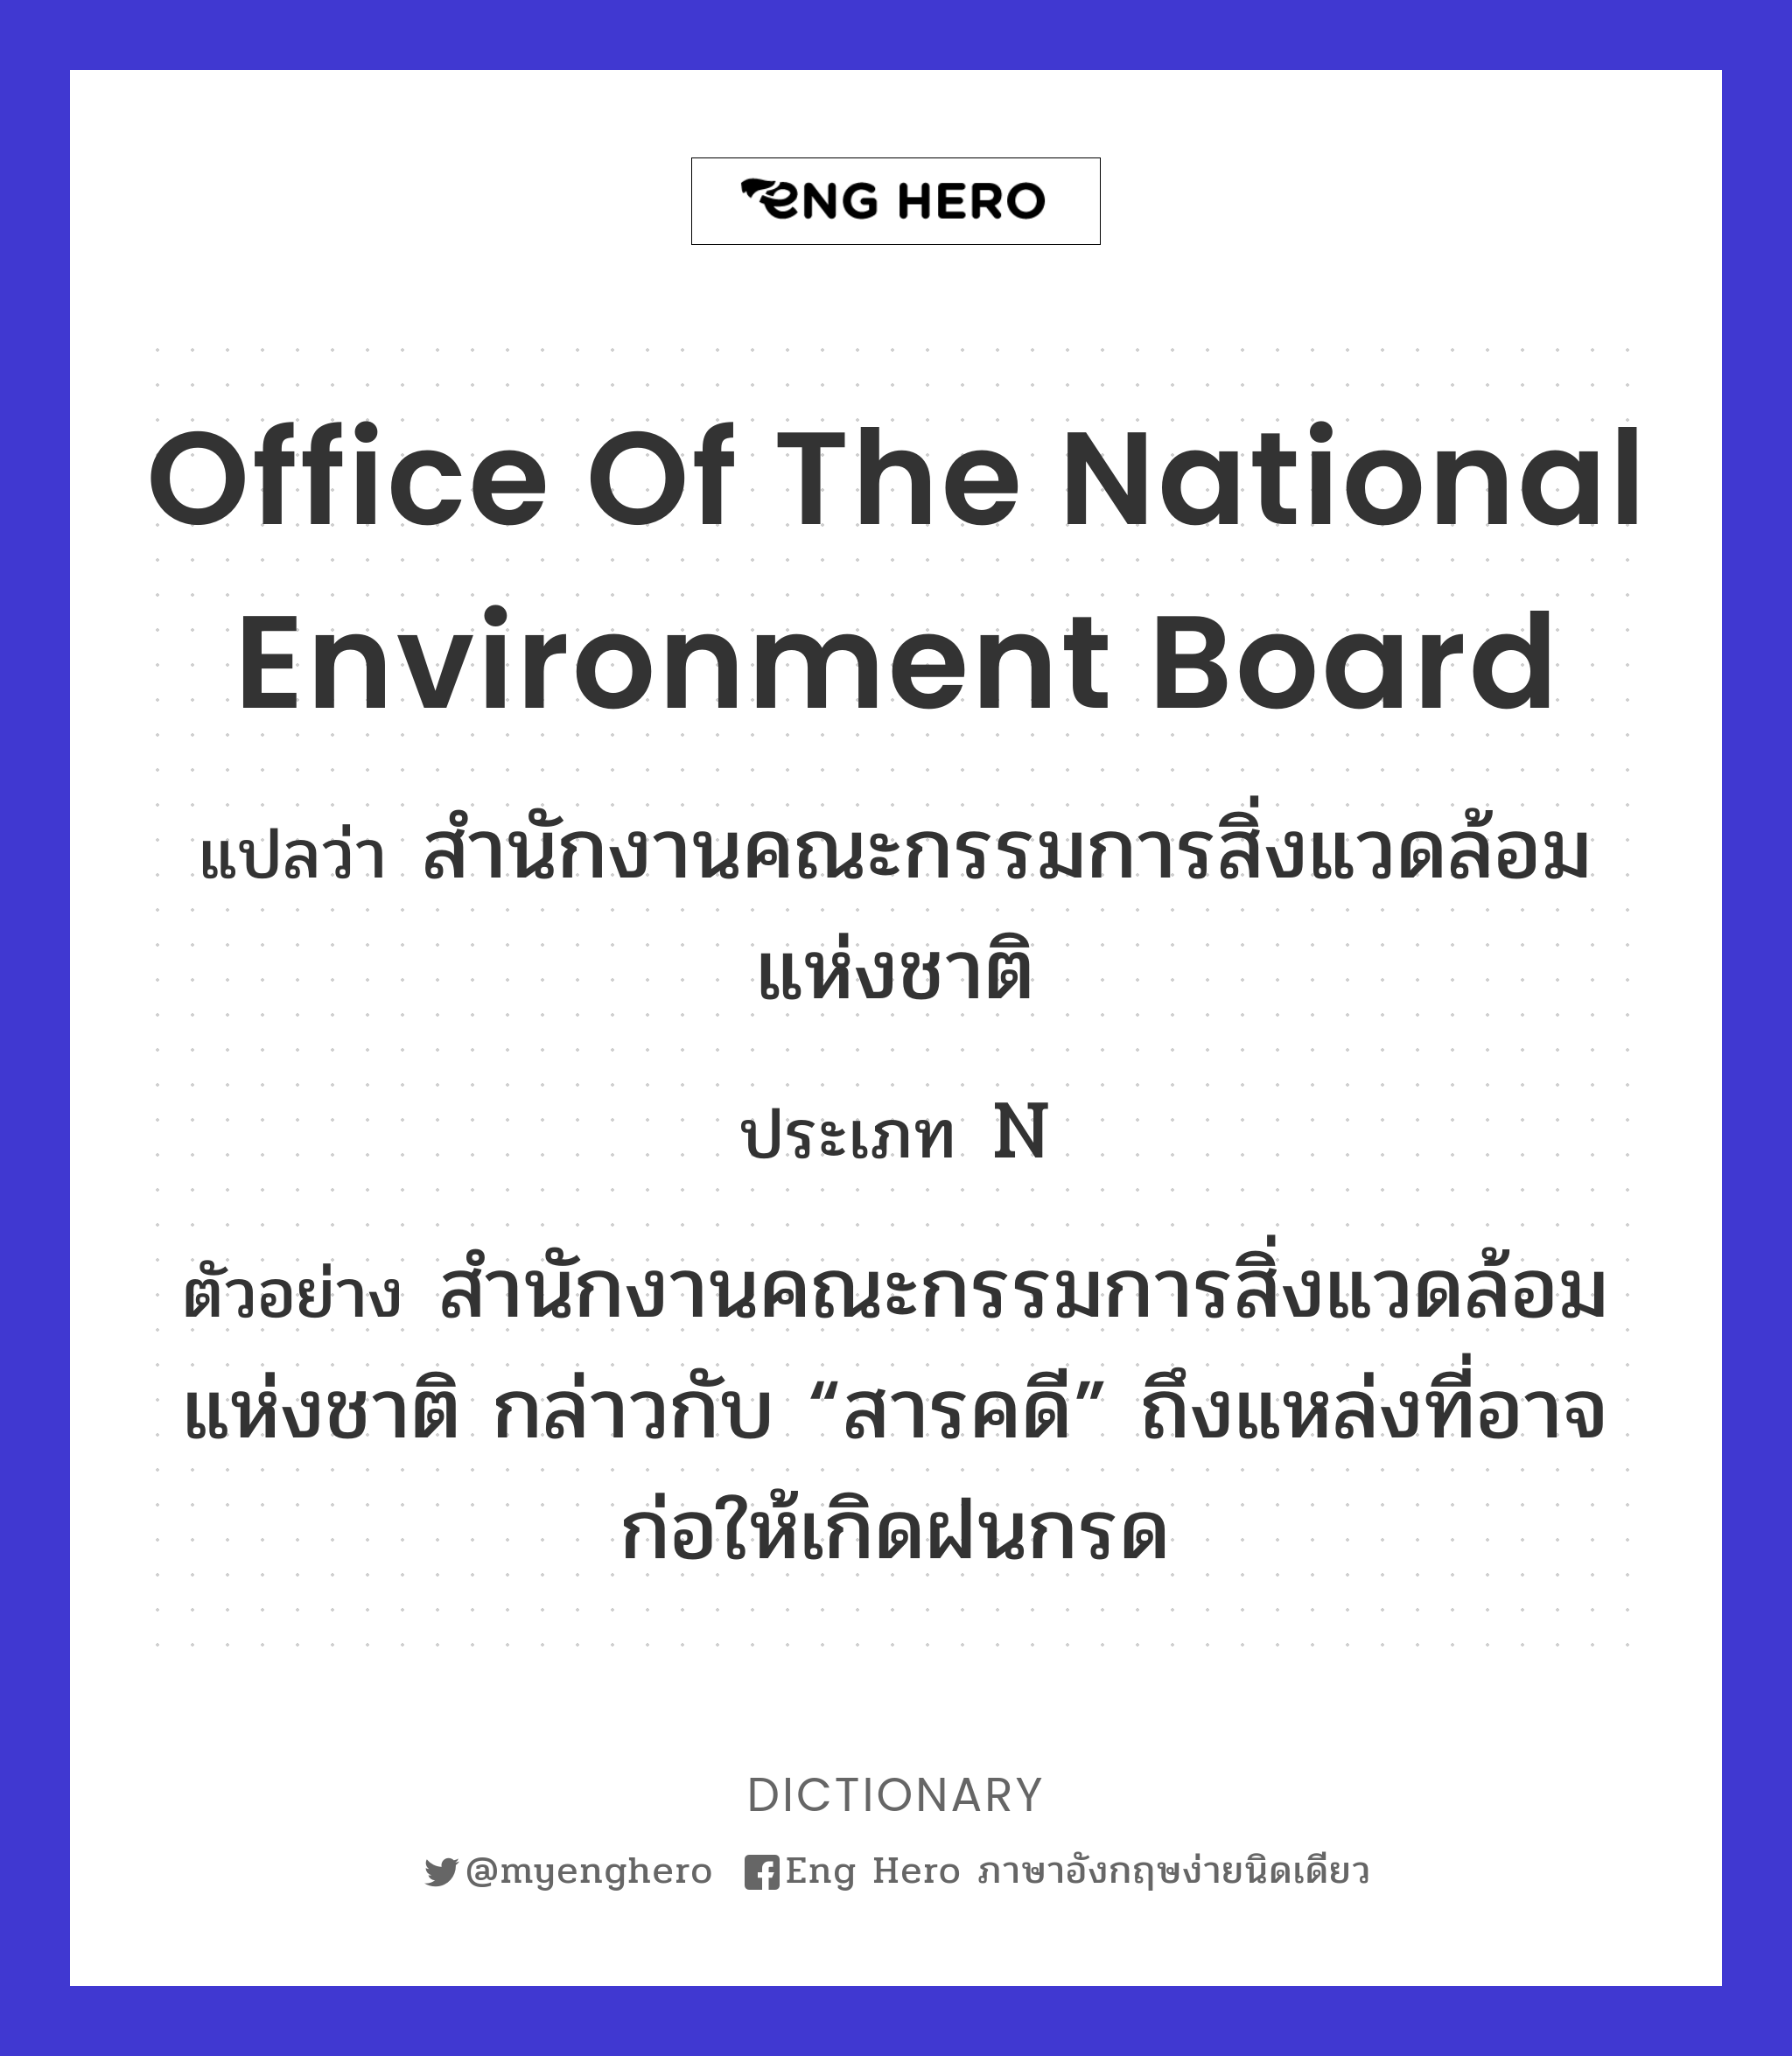 Office of the National Environment Board